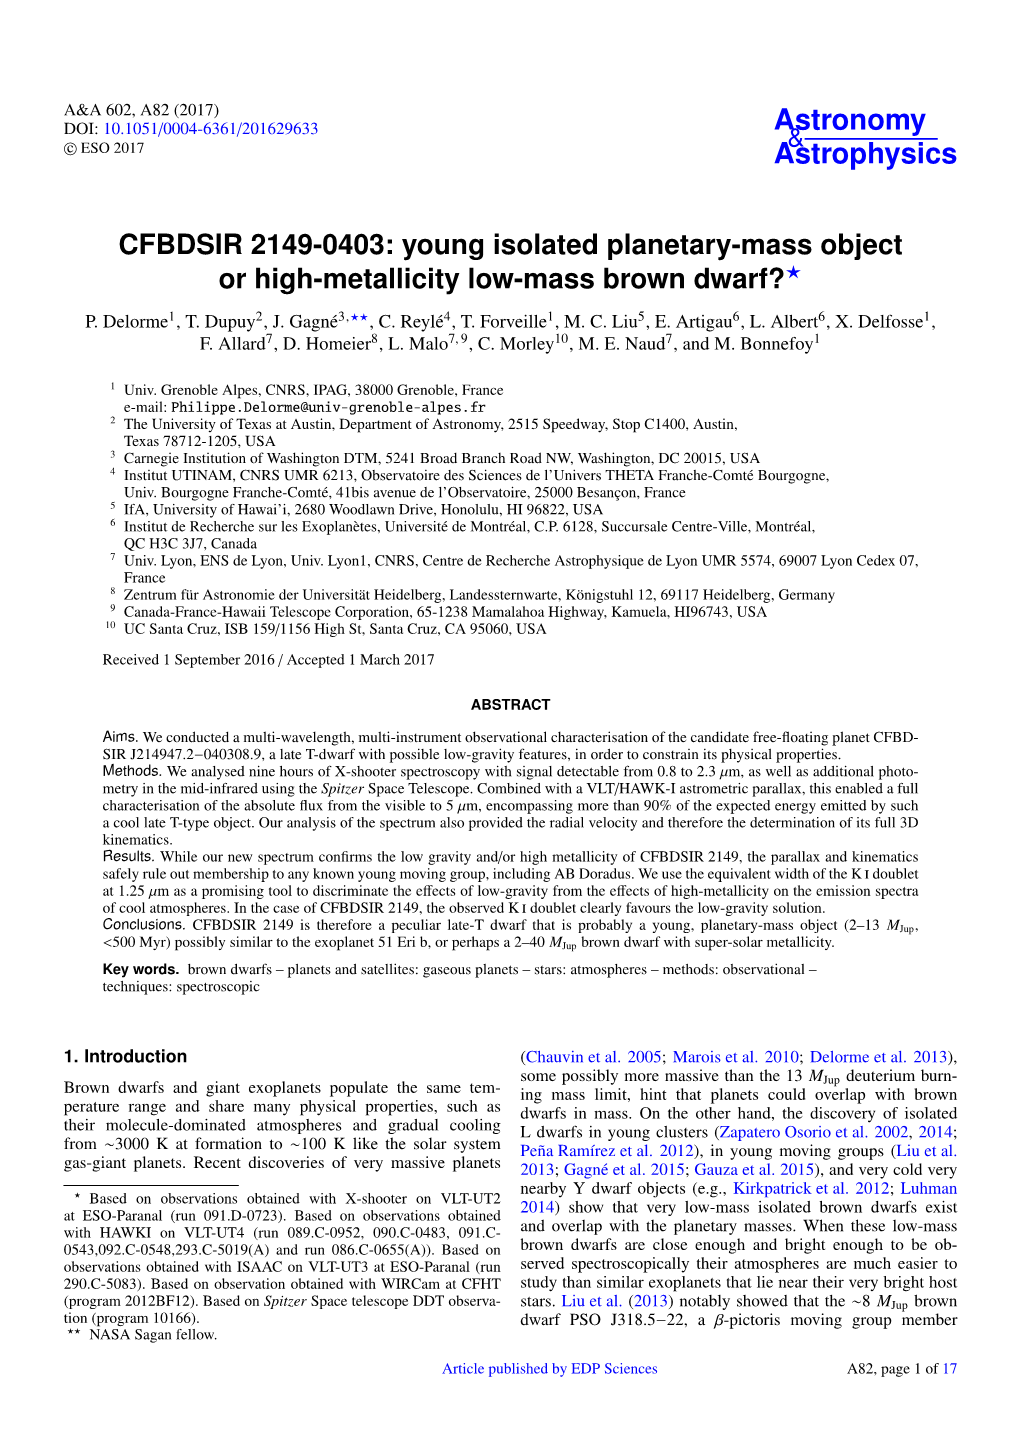 CFBDSIR 2149-0403: Young Isolated Planetary-Mass Object Or High-Metallicity Low-Mass Brown Dwarf?? P